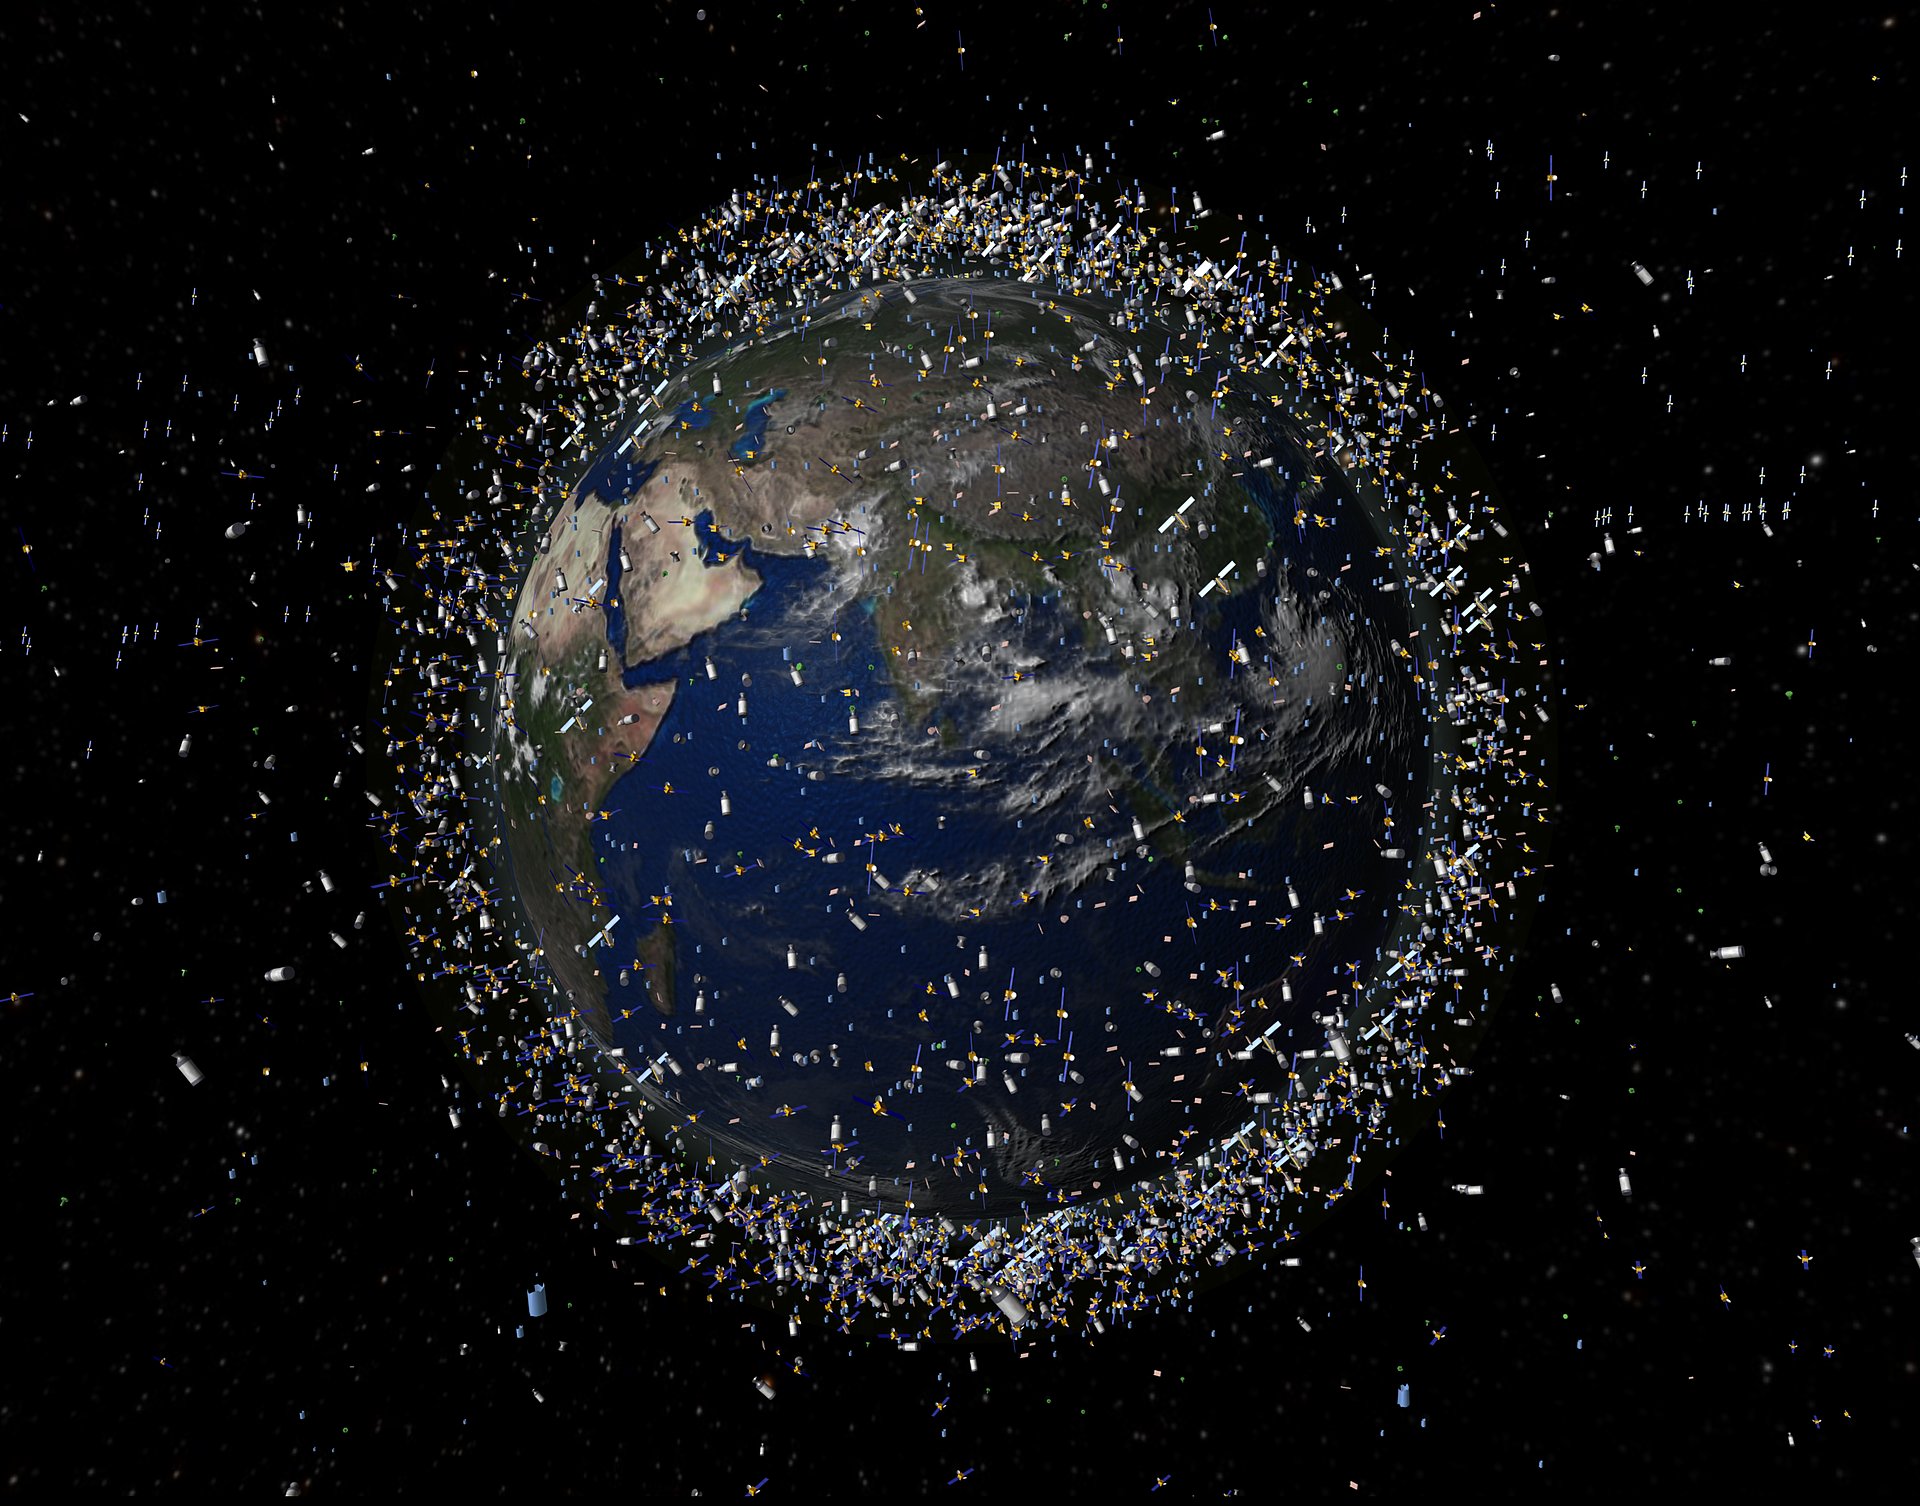 In addition to satellites and space probes, garbage of various sizes is also in orbit around the Earth. 